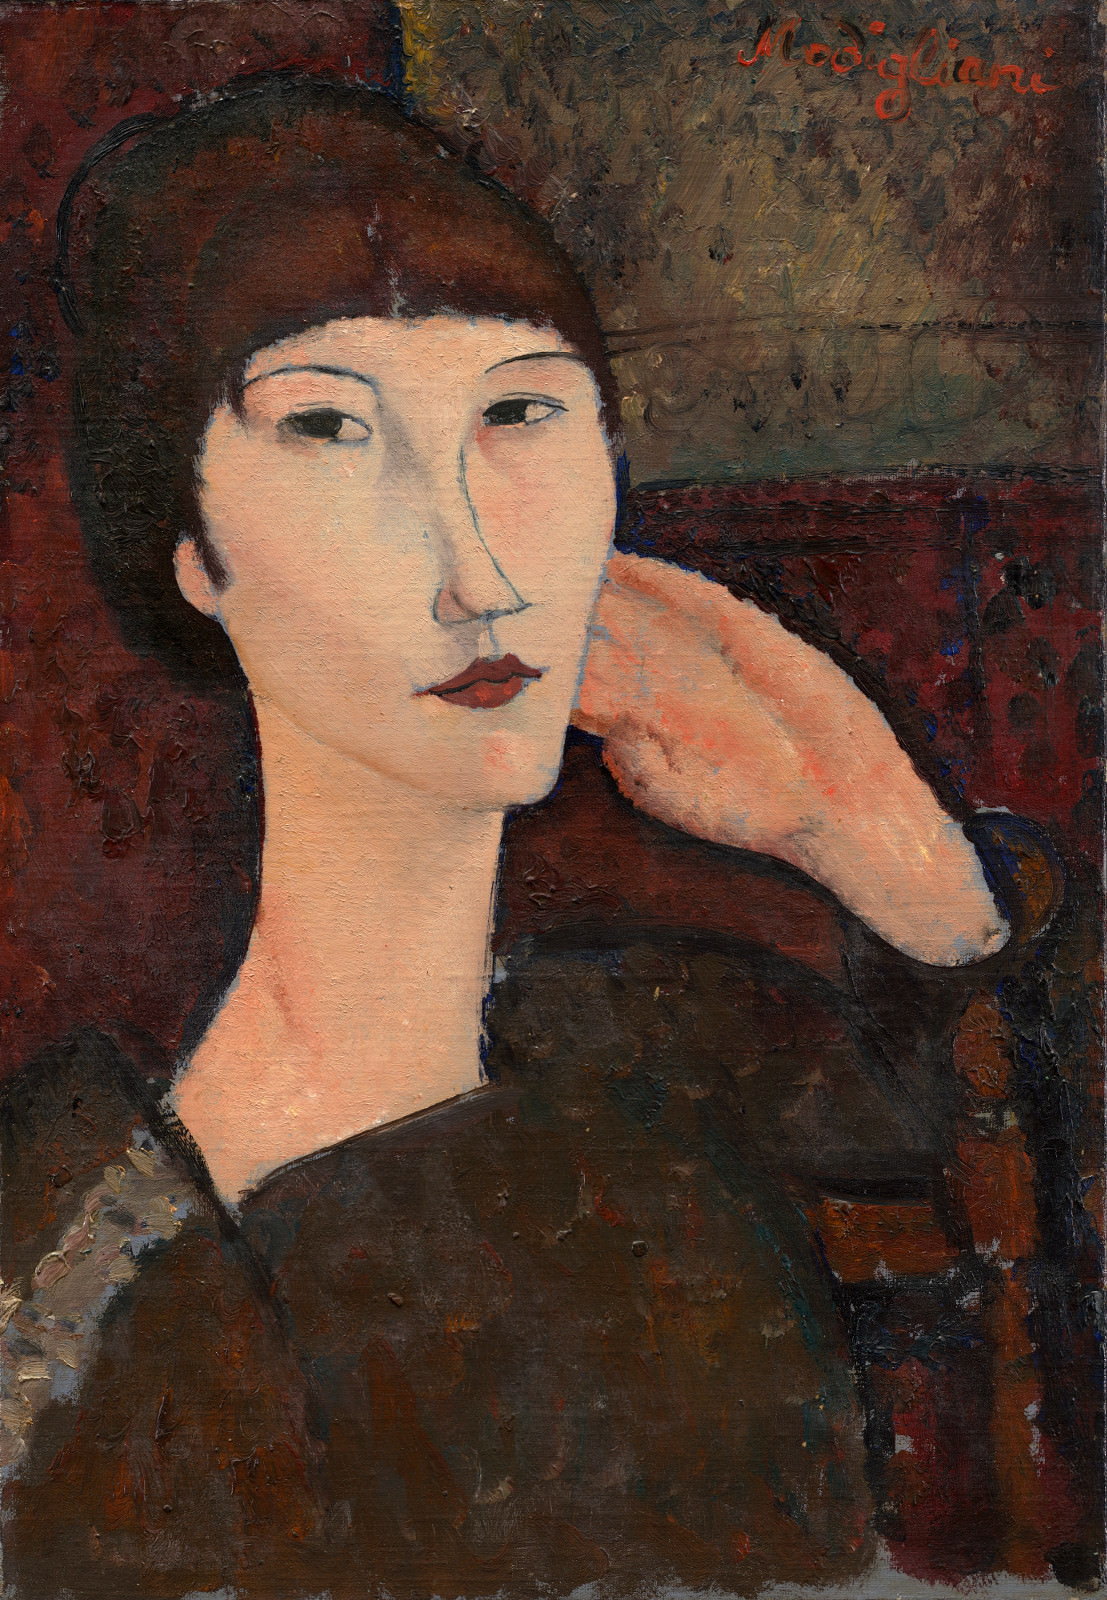 Fig. 8 – Adrienne (Woman with Bangs), Amedeo Modigliani, 1917, oil on linen, 55.3 x 38.1 cm. National Gallery of Art, Washington. Chester Dale Collection.